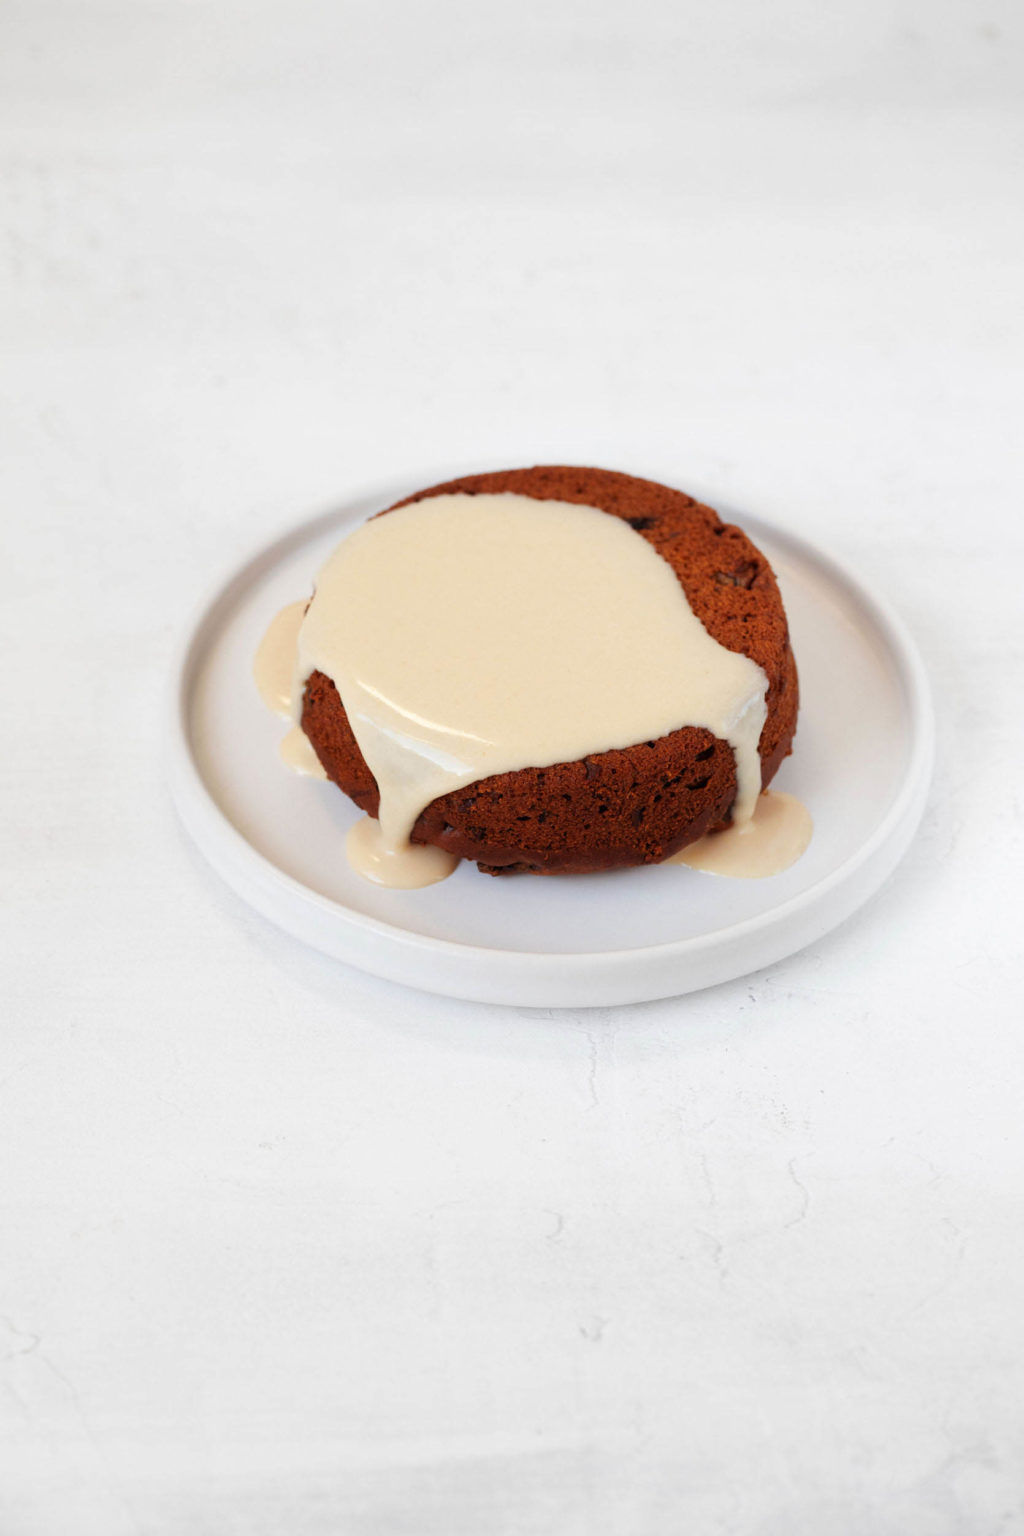 A serving of vegan sticky toffee pudding has been topped with a creamy cashew sauce. It rests on a small white plate.